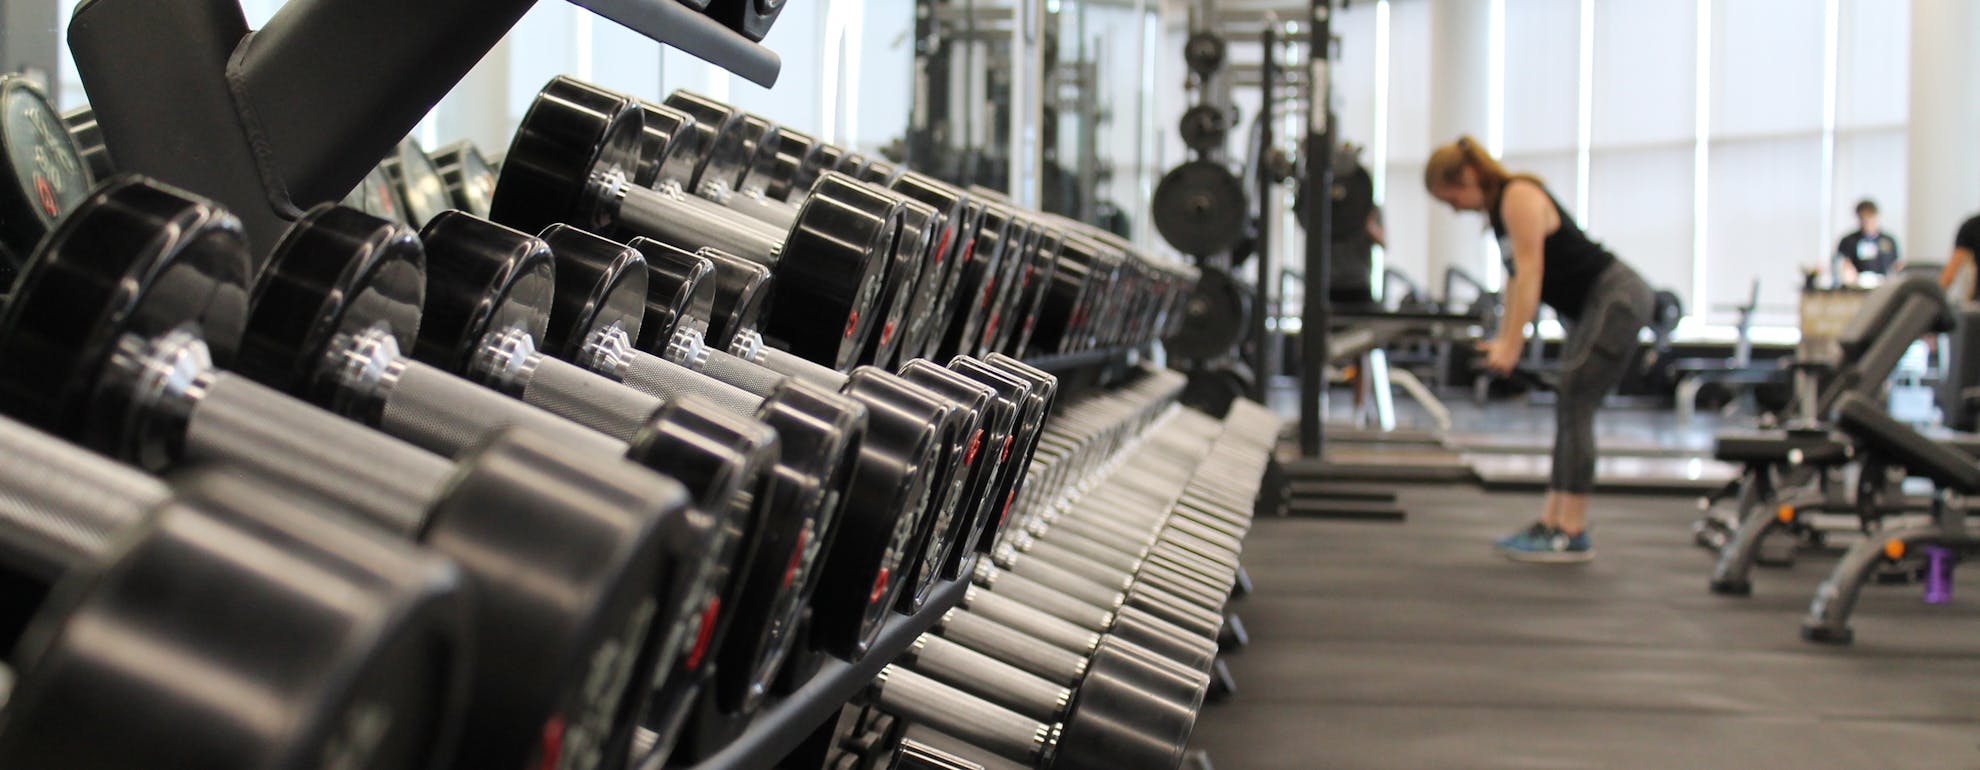 5 Top Tips on How to Overcome Gym Anxiety